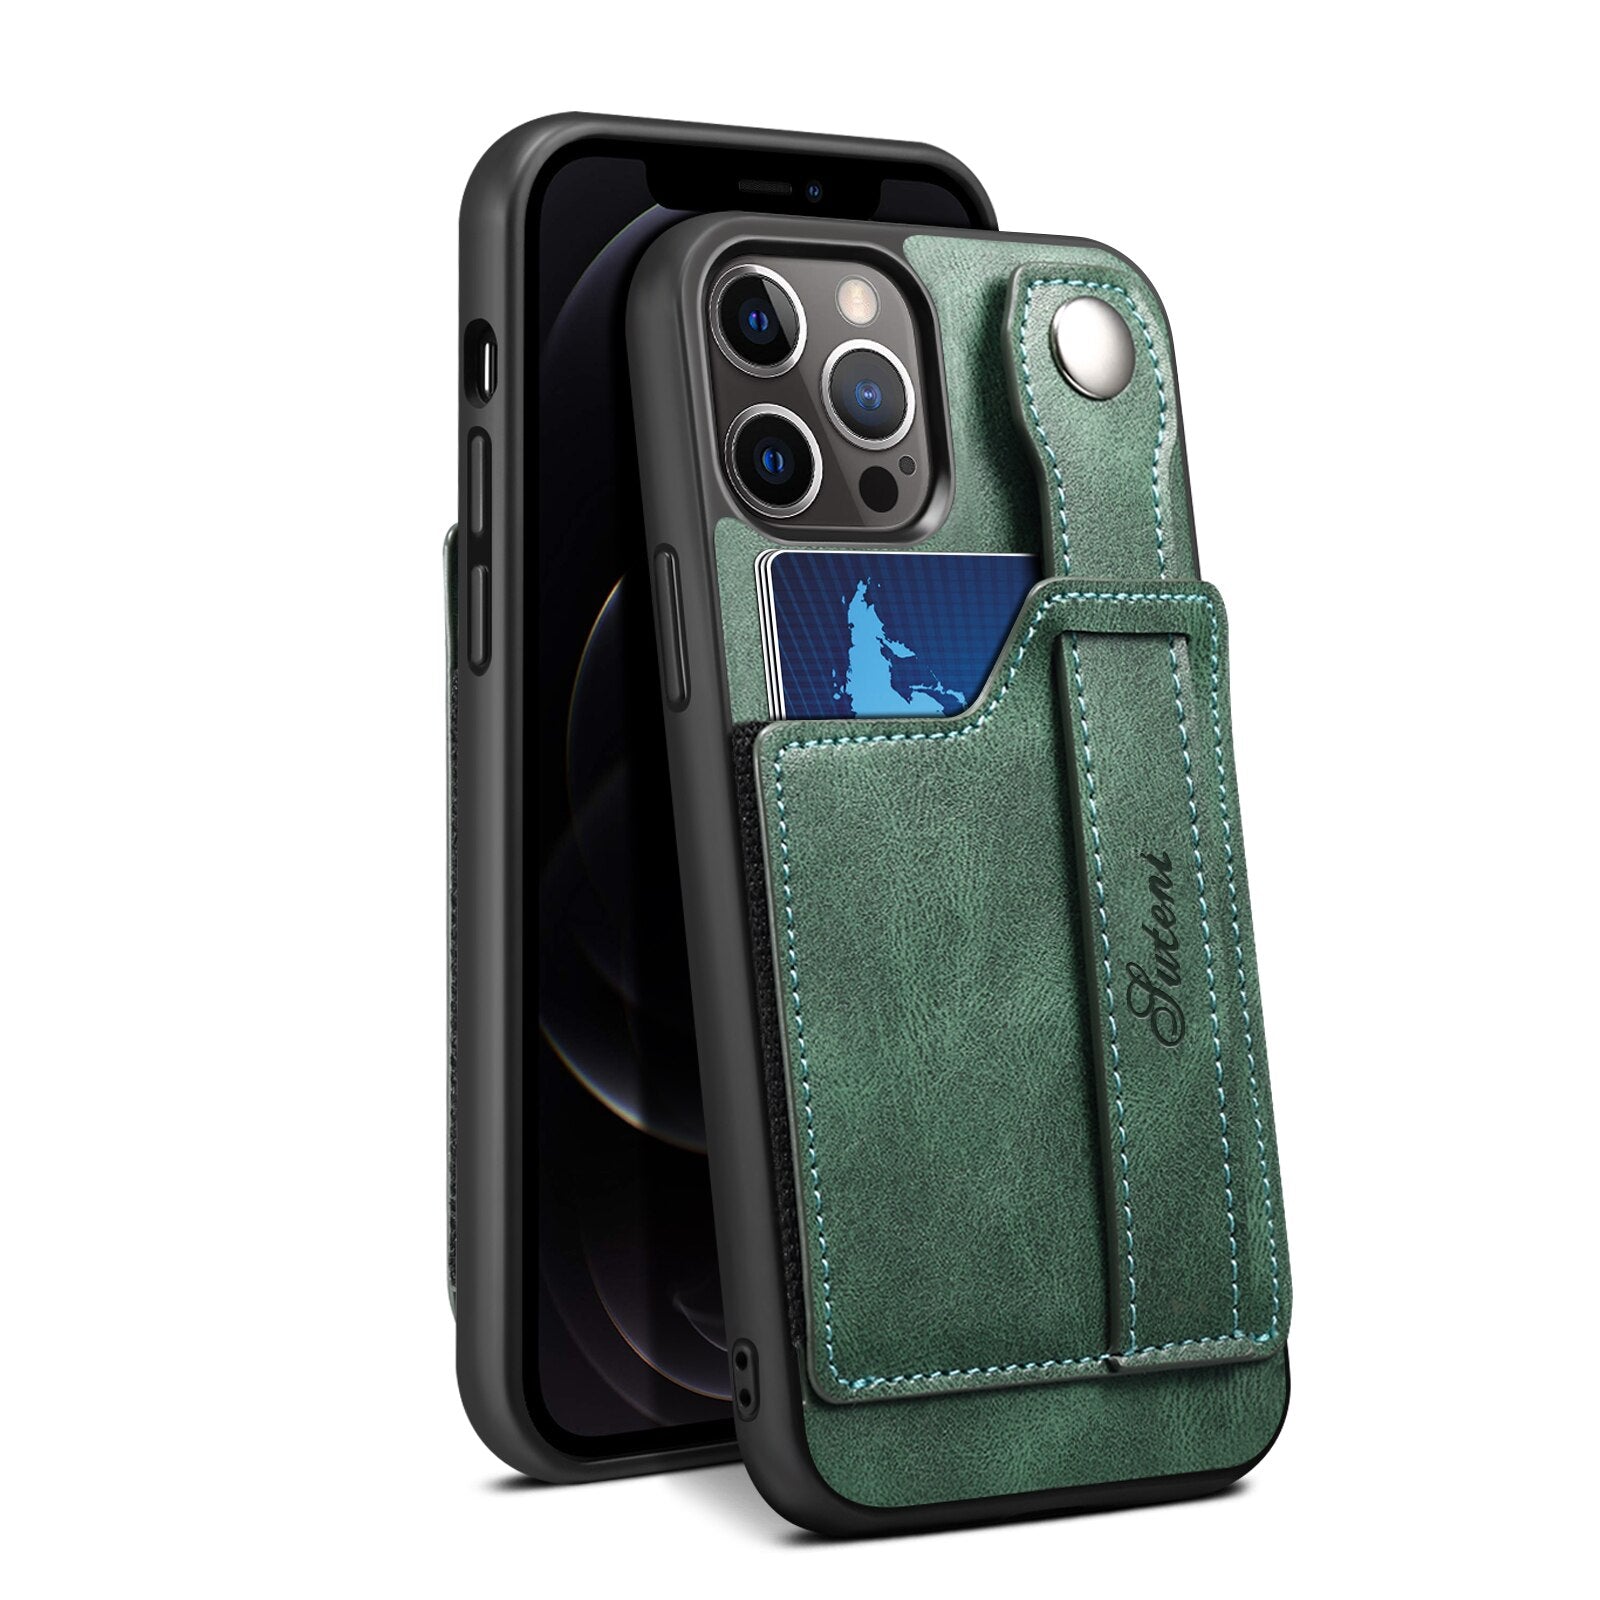 iPhone 12/12 Pro/12 Mini/12 Pro Max PU Case Leather Wallet Flip Case - Stand Feature with Wrist Strap and Credit Card Pockets - 380230 for iPhone 12 / Green / United States Find Epic Store